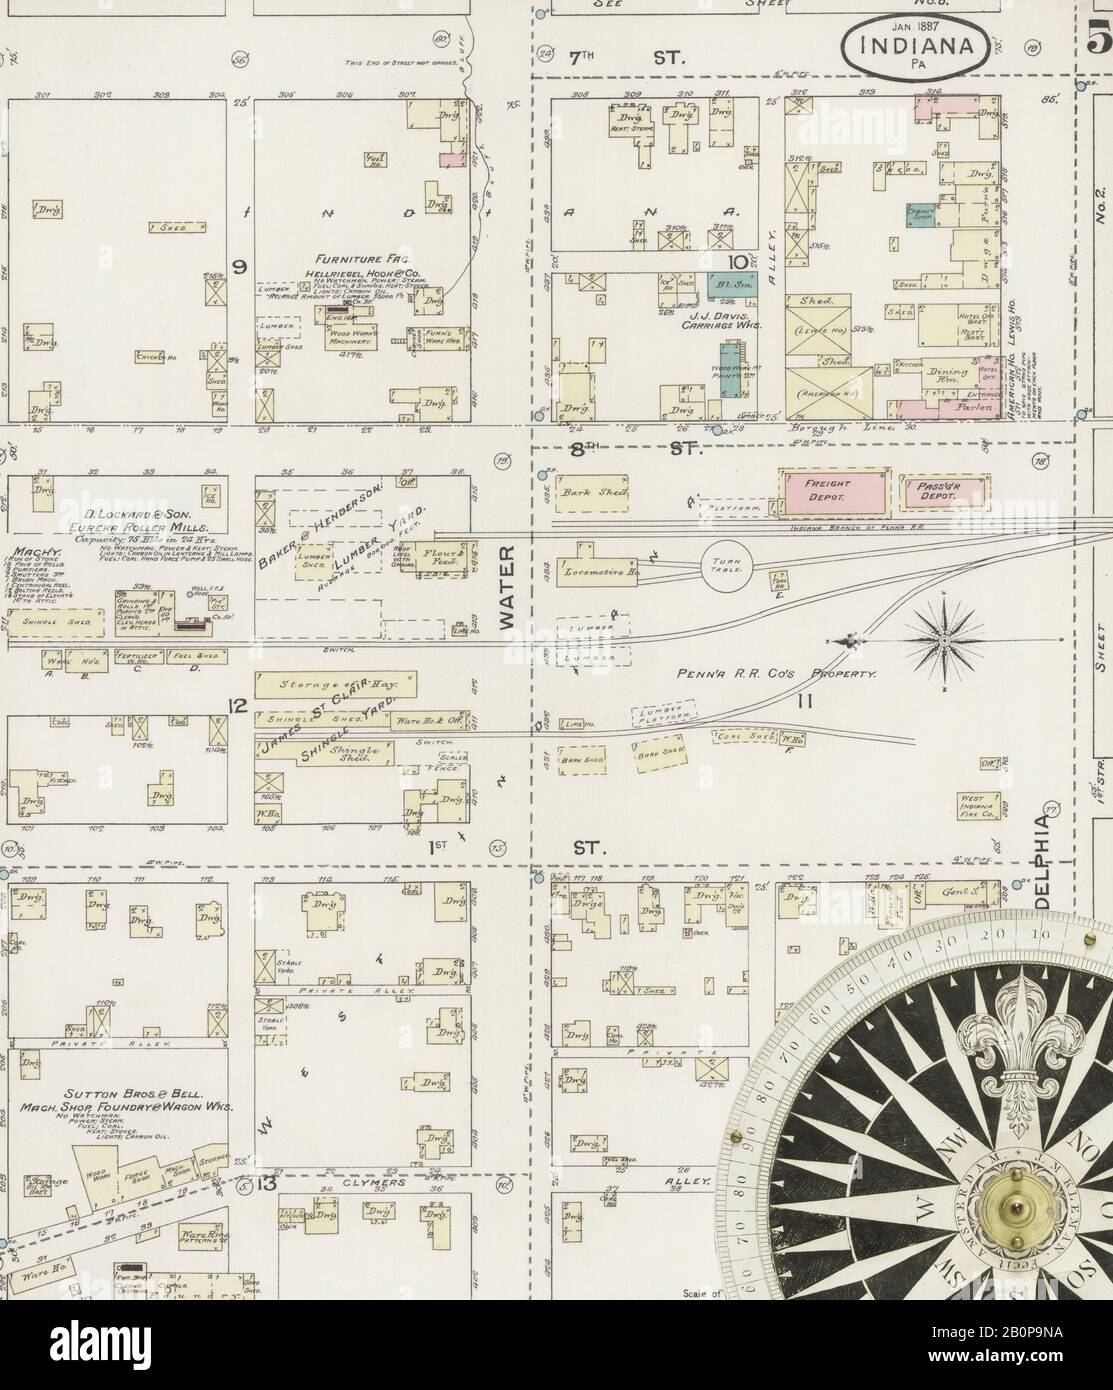 Image 5 of Sanborn Fire Insurance Map from Indiana, Indiana County, Pennsylvania. Jan 1887. 7 Sheet(s), America, street map with a Nineteenth Century compass Stock Photo